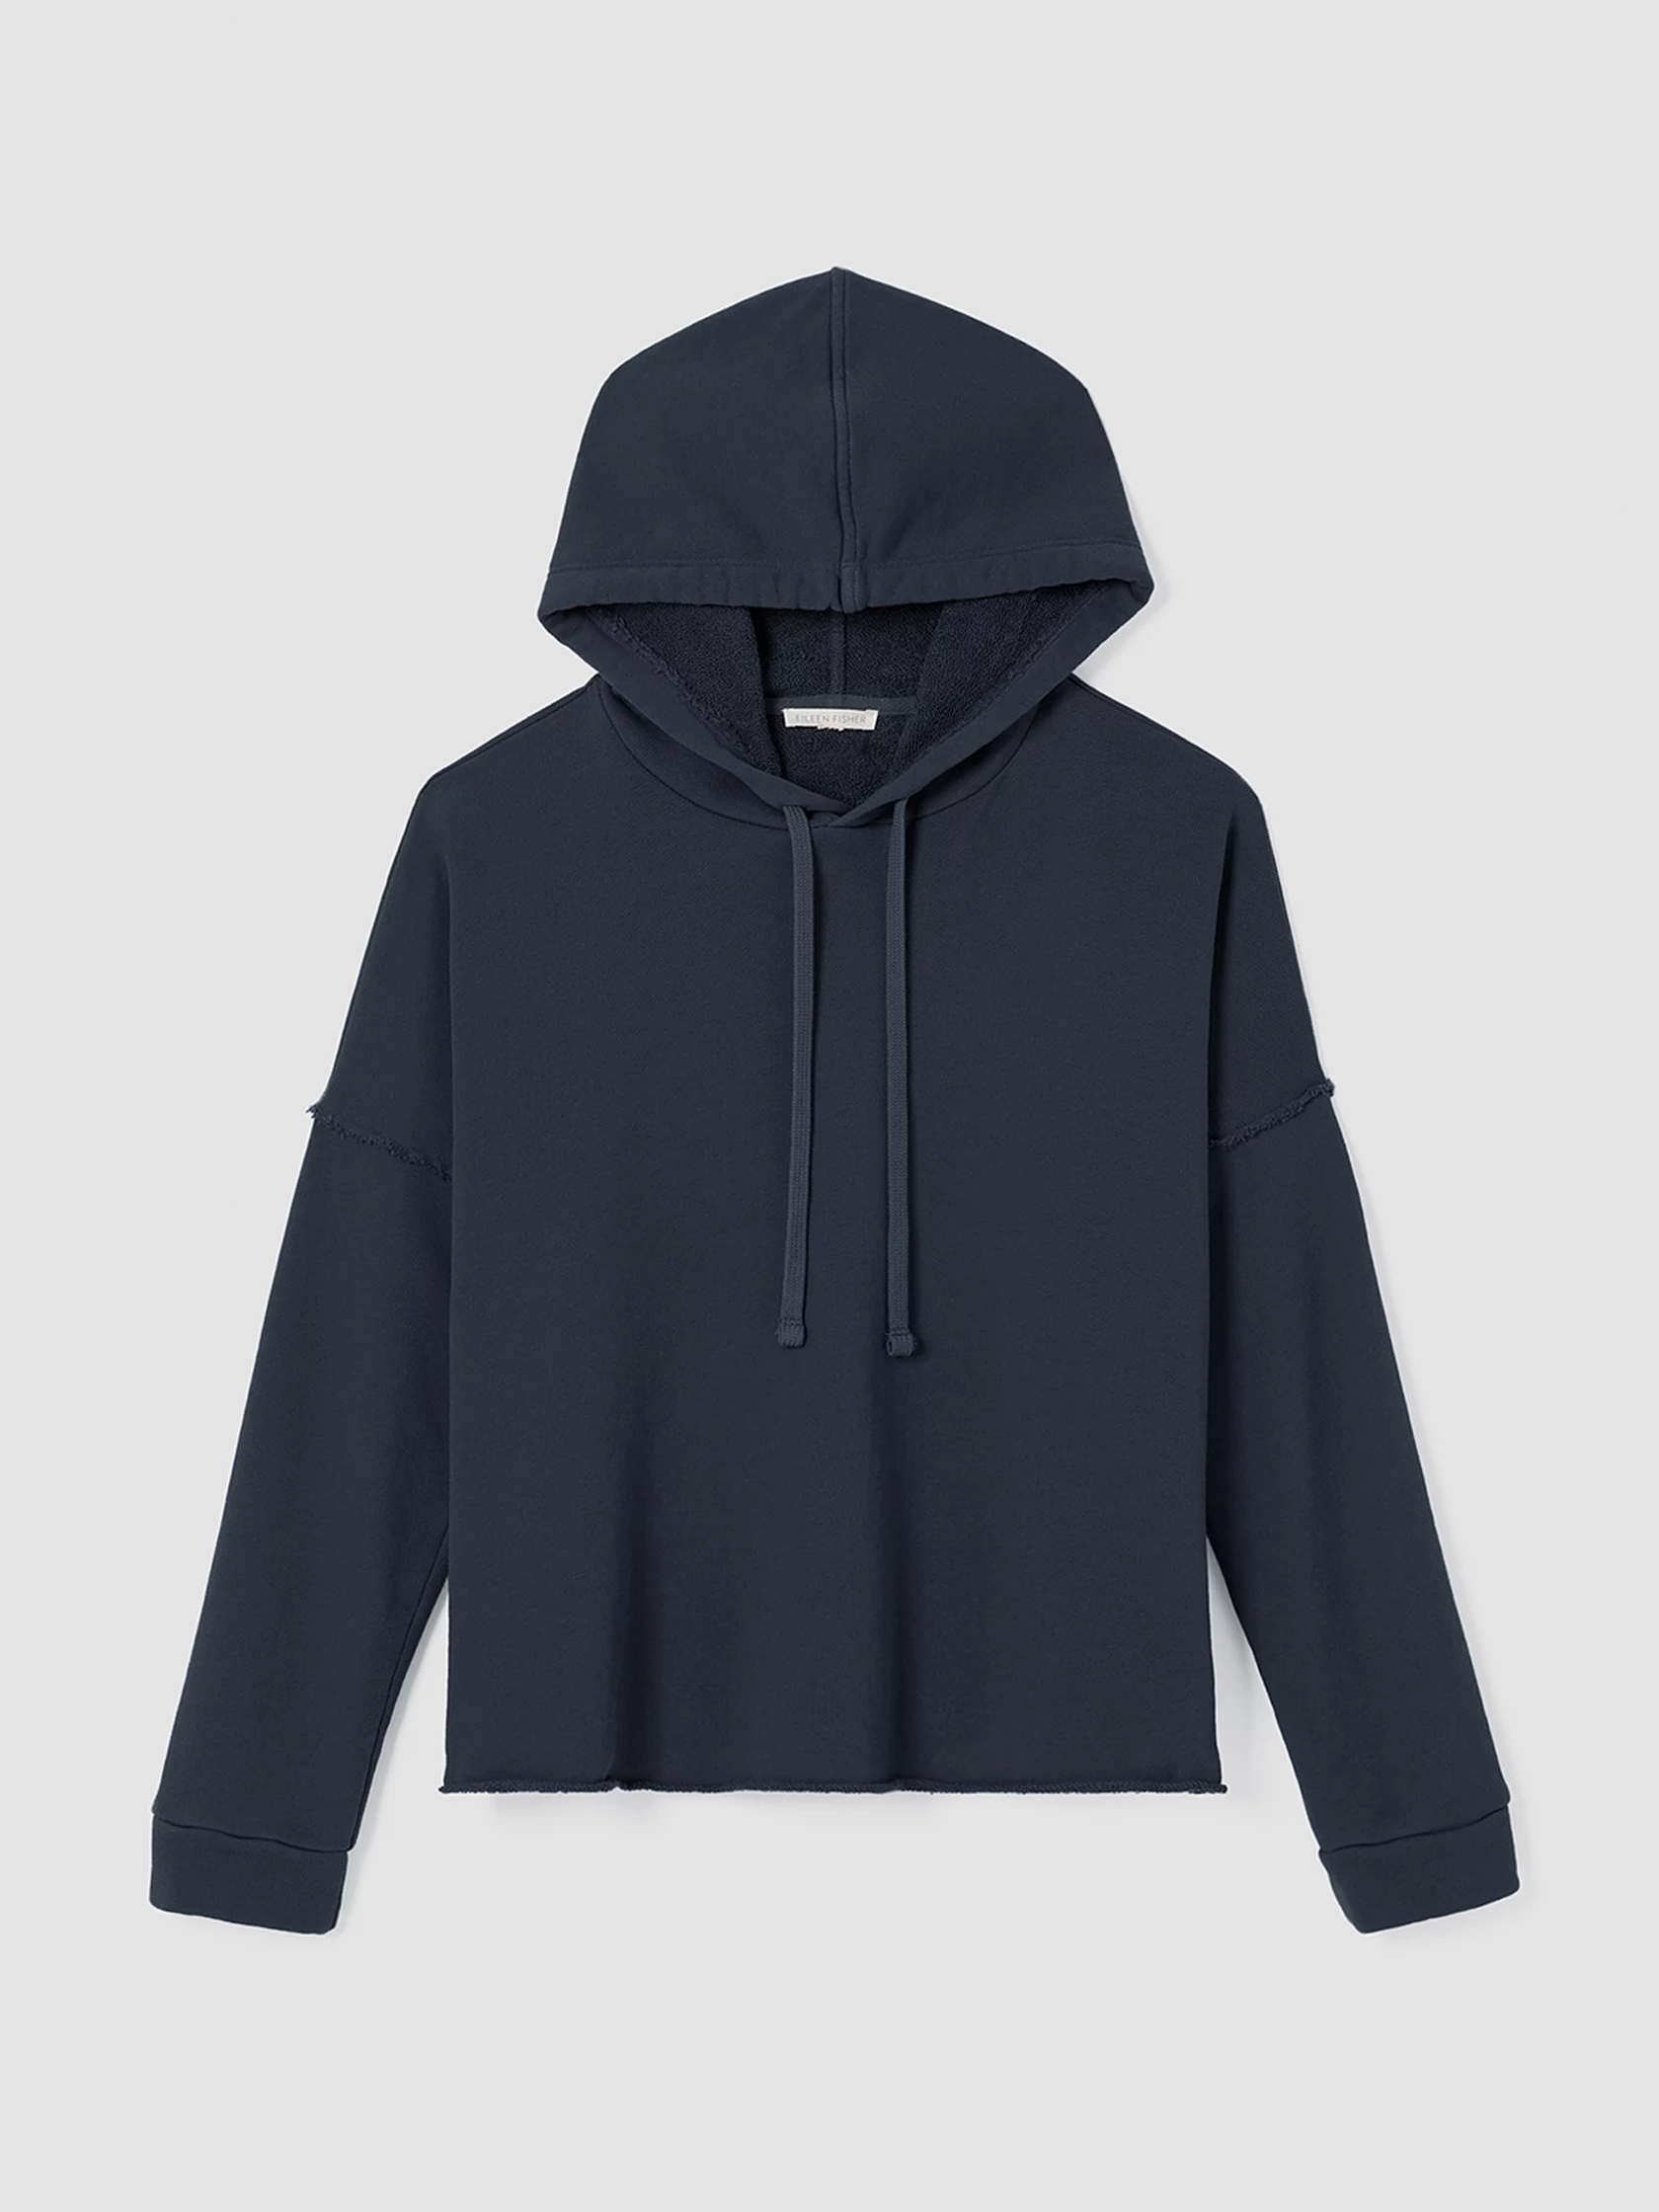 Organic Cotton French Terry Hooded Top